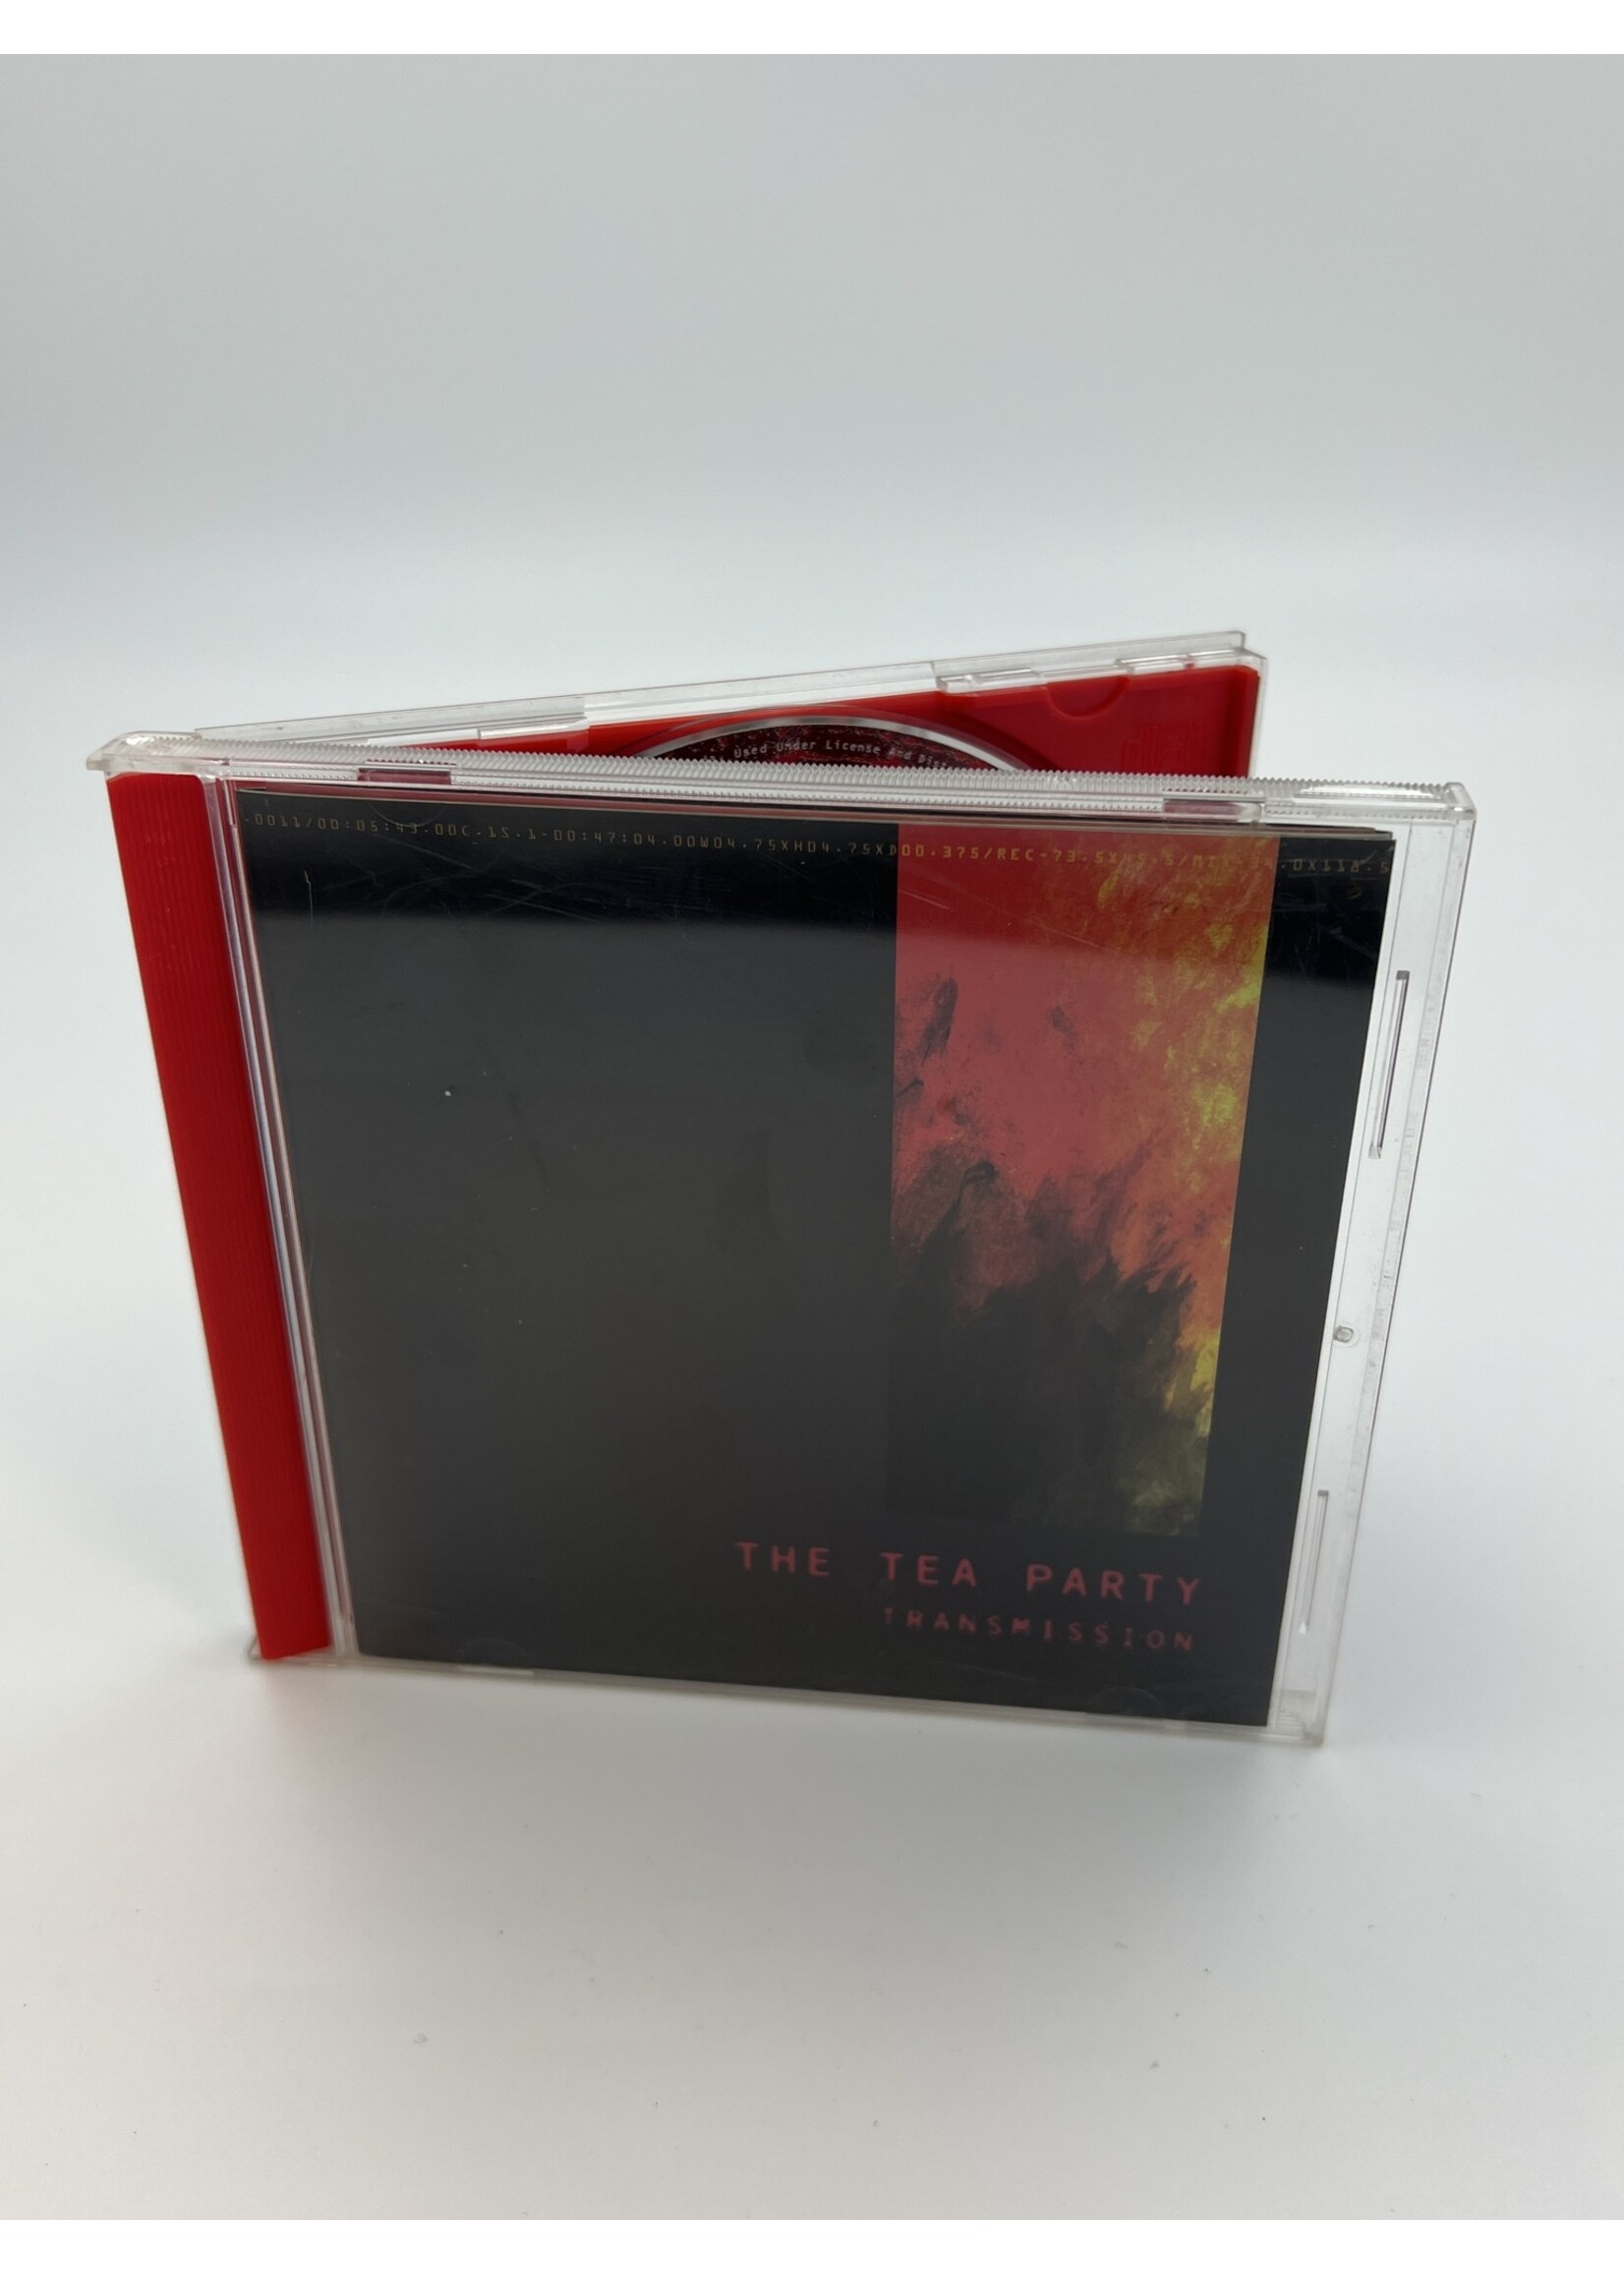 CD   The Tea Party Transmission CD